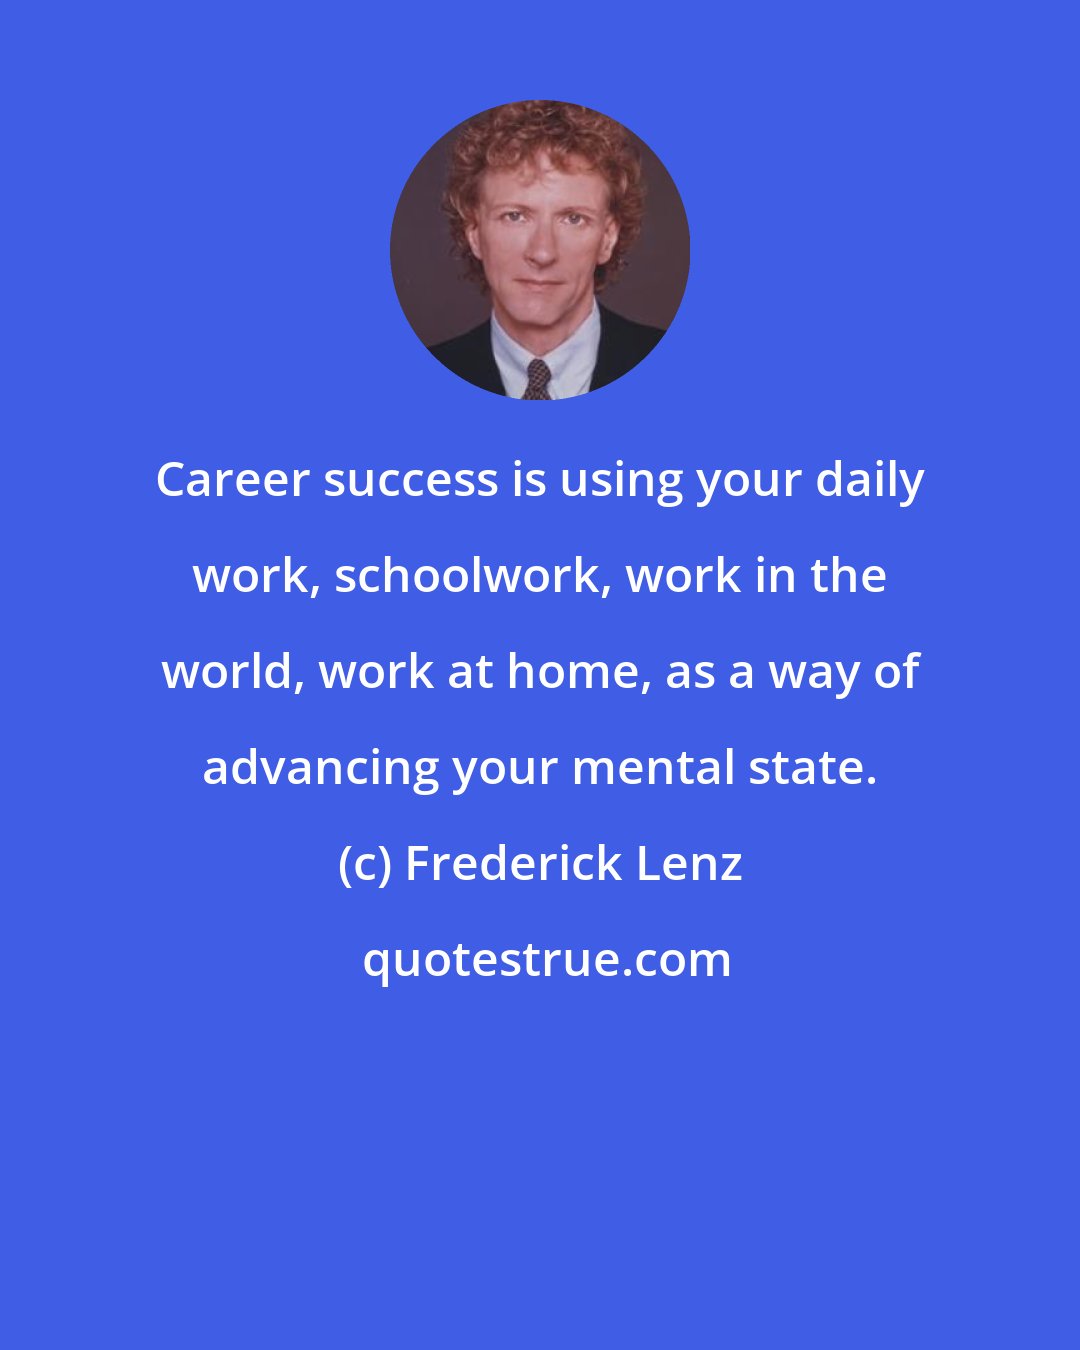 Frederick Lenz: Career success is using your daily work, schoolwork, work in the world, work at home, as a way of advancing your mental state.